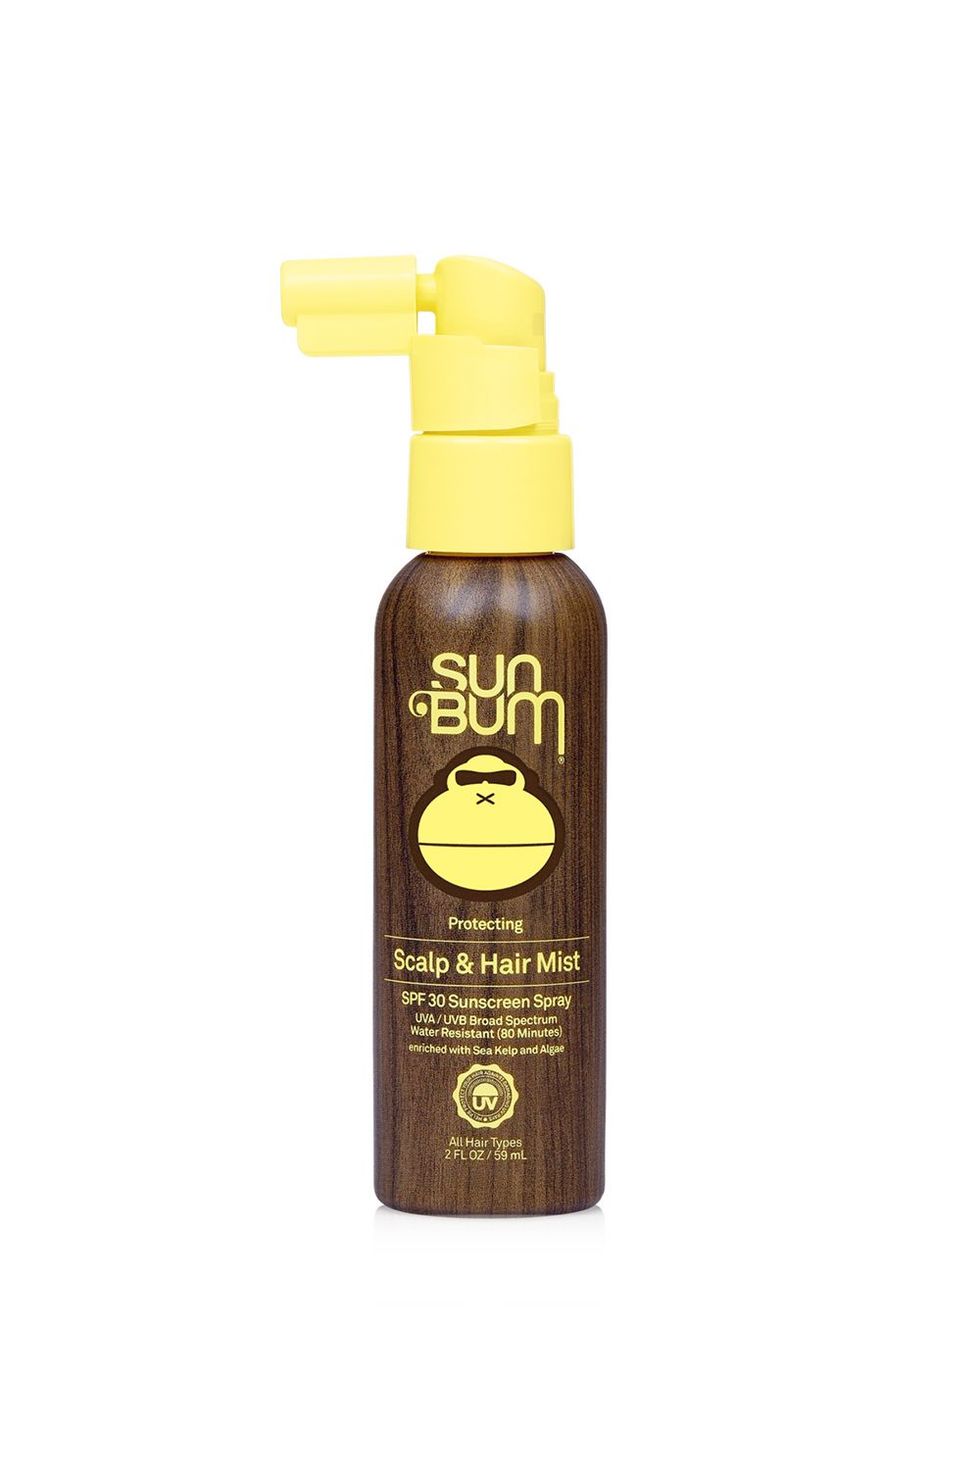 Protecting Scalp and Hair Mist SPF 30